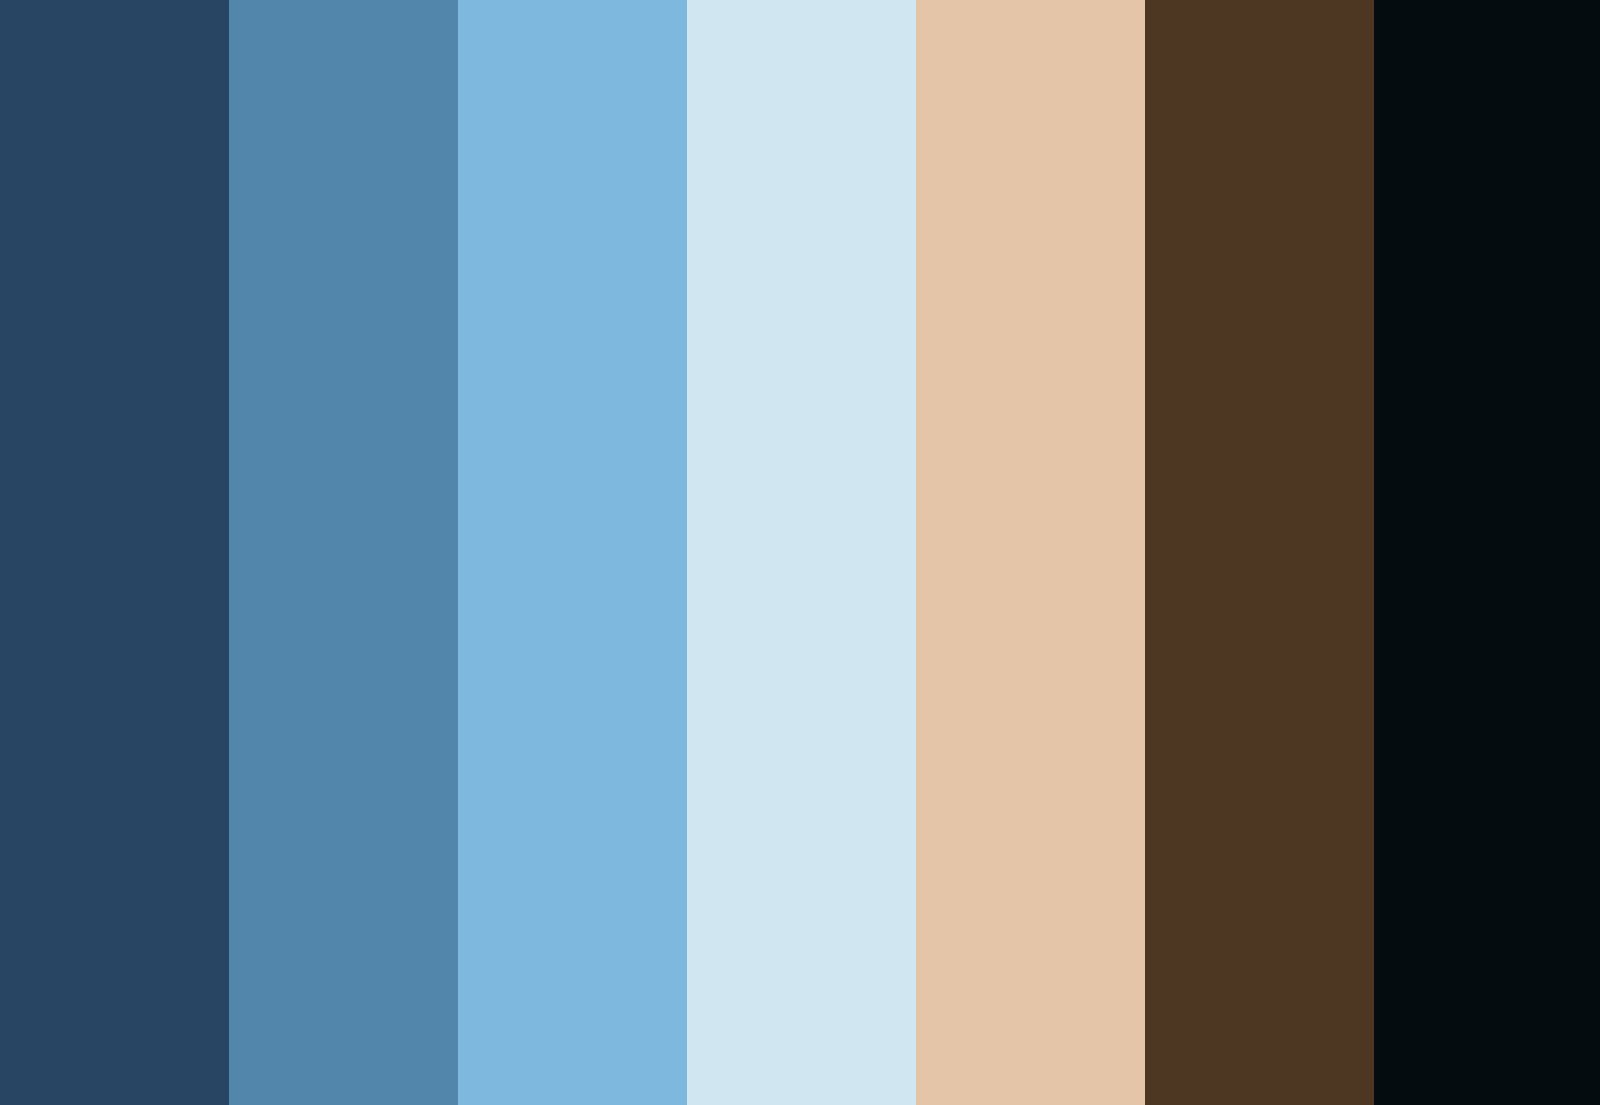 A color palette of six vertical stripes in different shades of blue and brown.